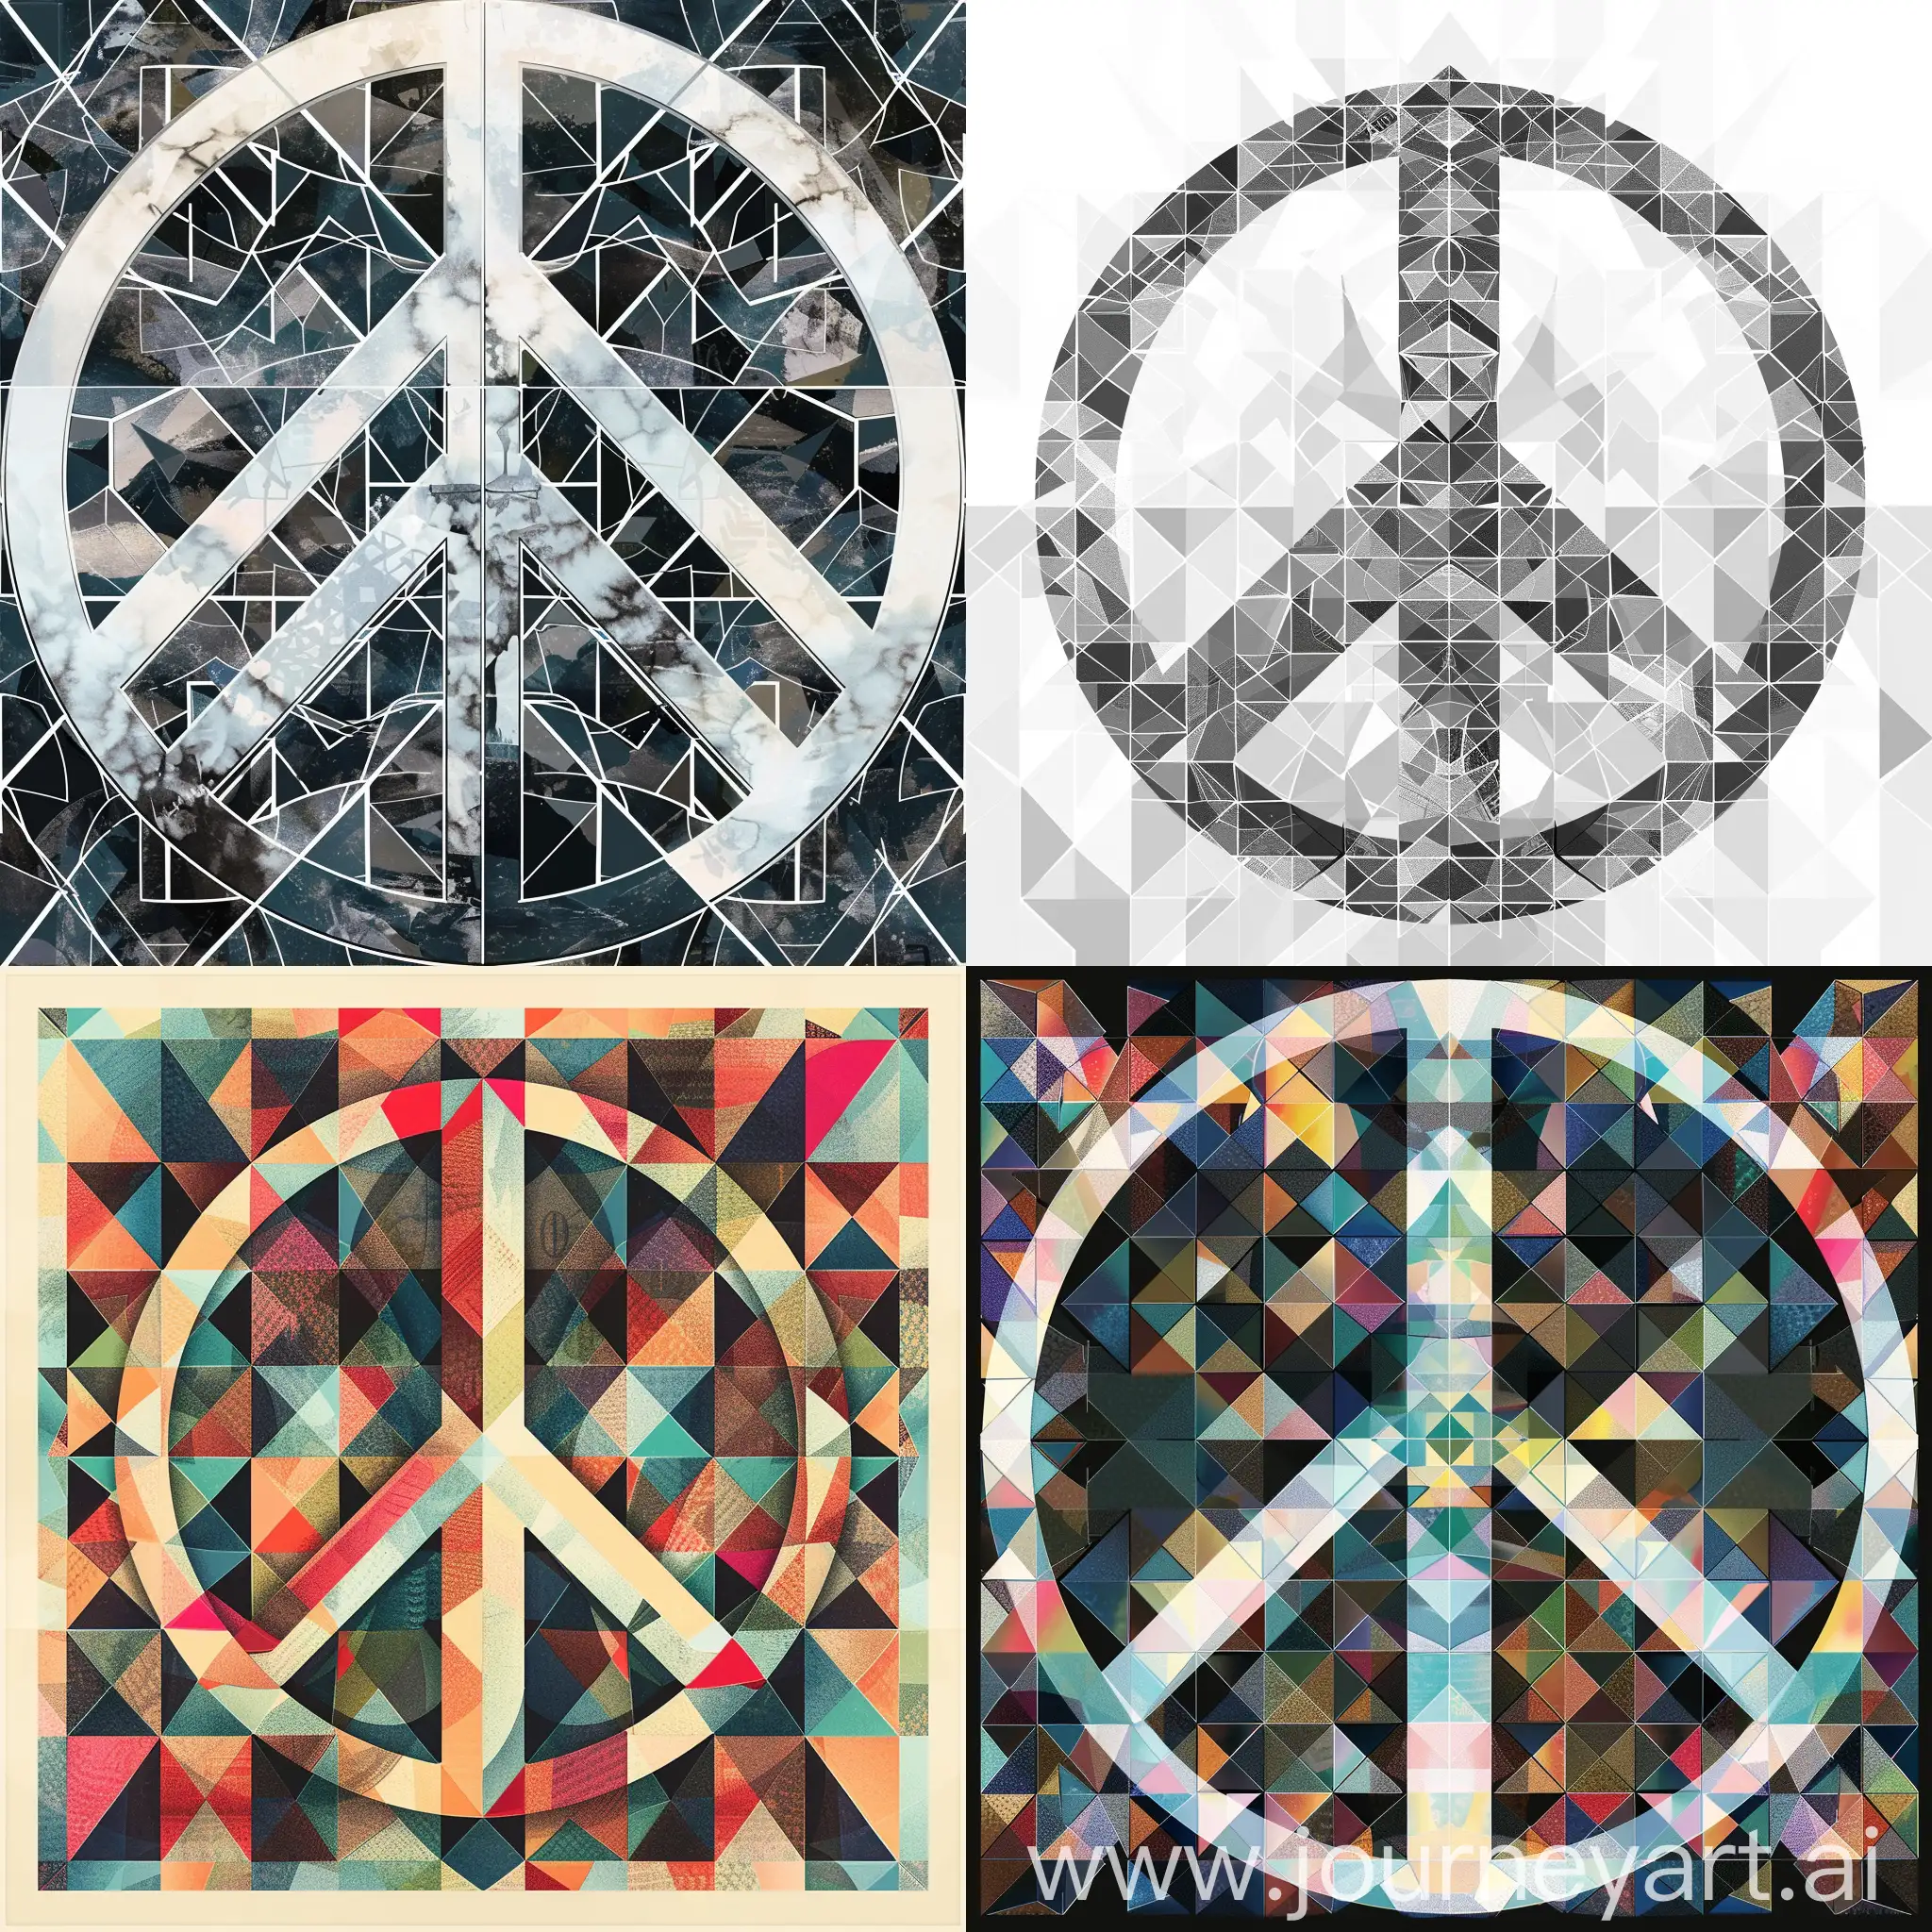 Harmonious-Geometric-Patterns-with-Peace-Symbol-for-Banknote-Design